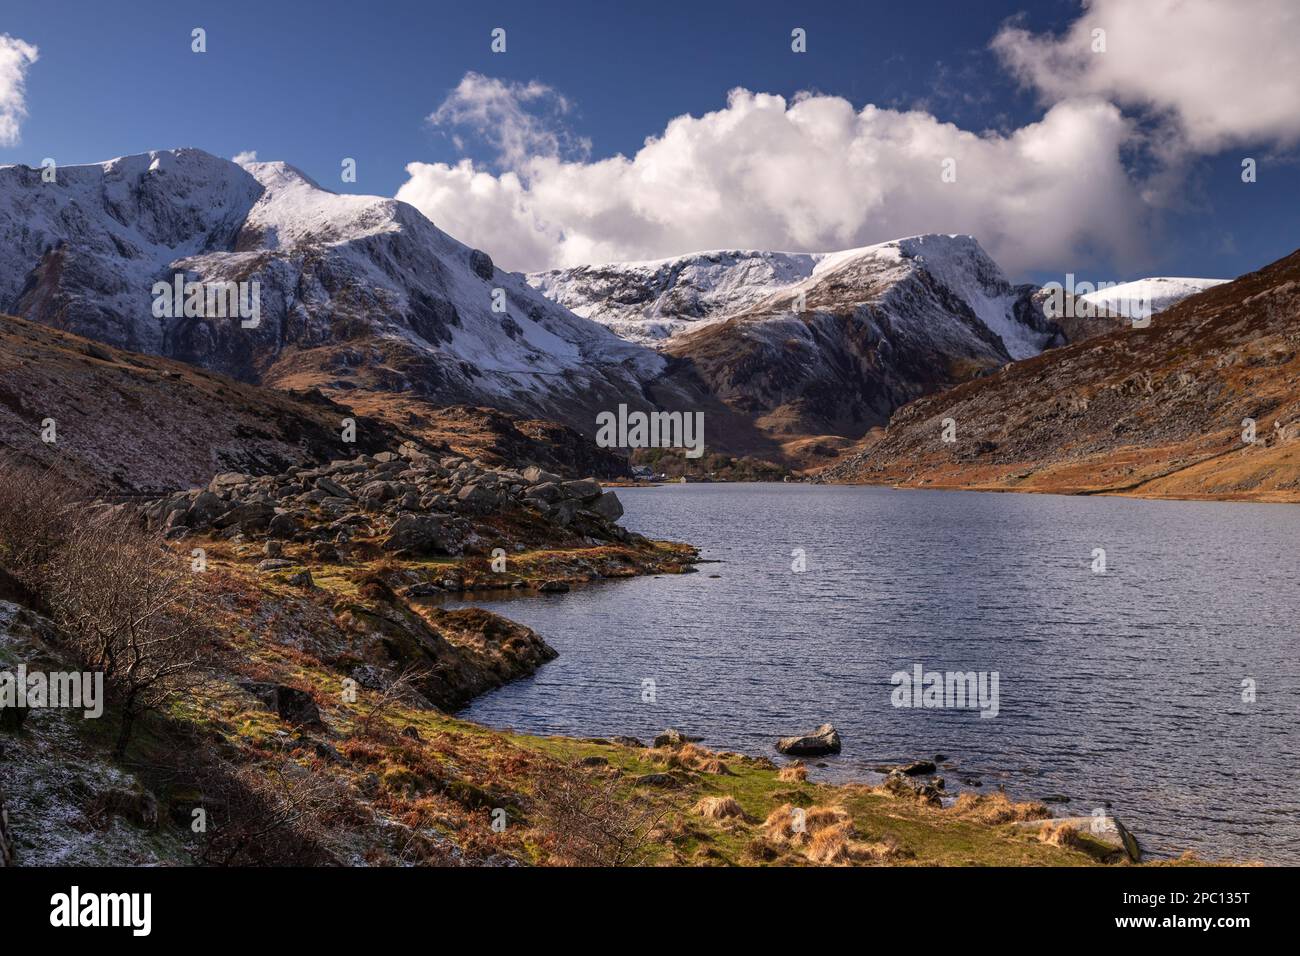 Llyn Ogwen and mountains with snow, Snowdonia, North Wales Stock Photo